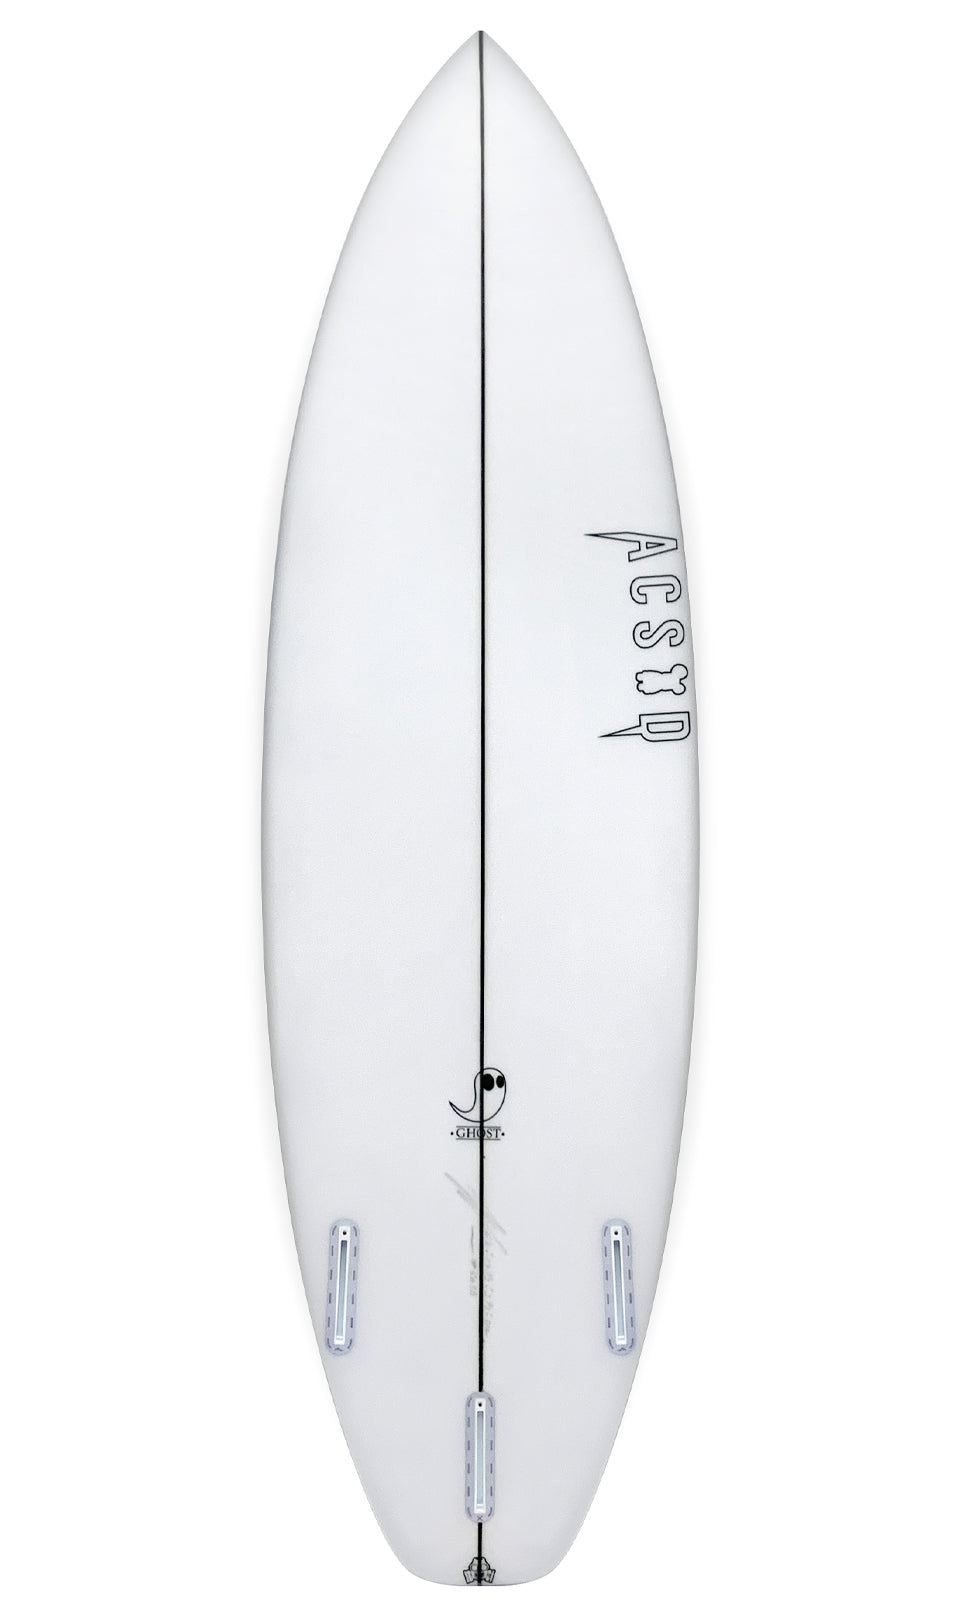 GHOST – ACSOD Surfboards